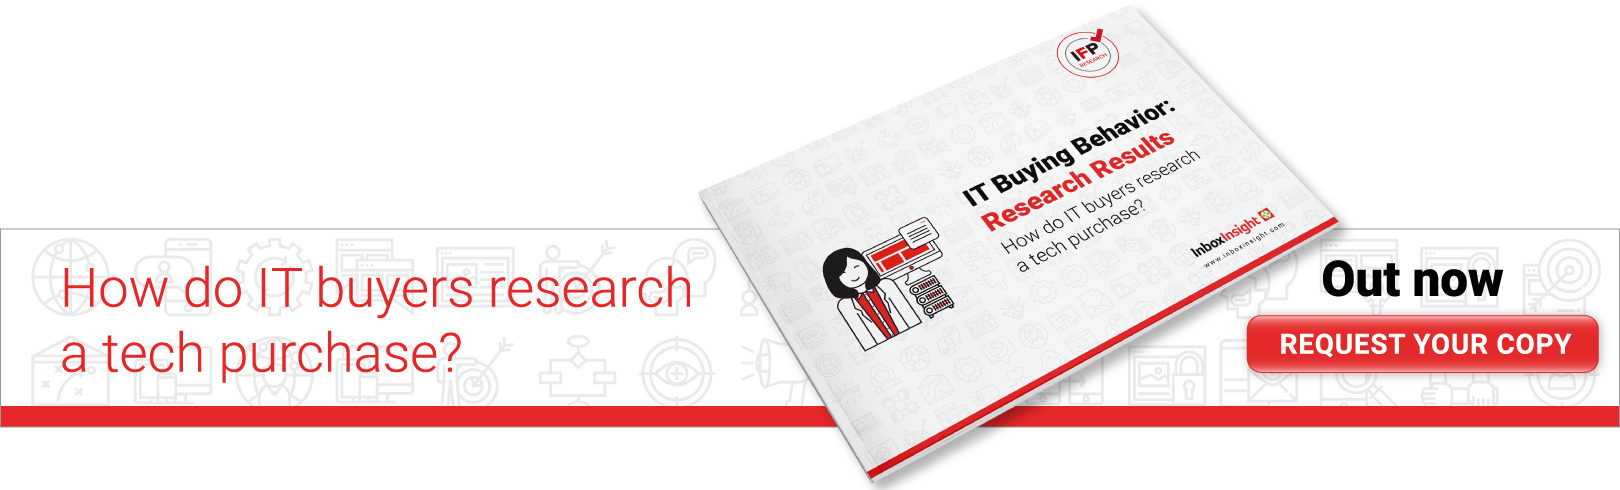 IT Buying Behavior: Research Results